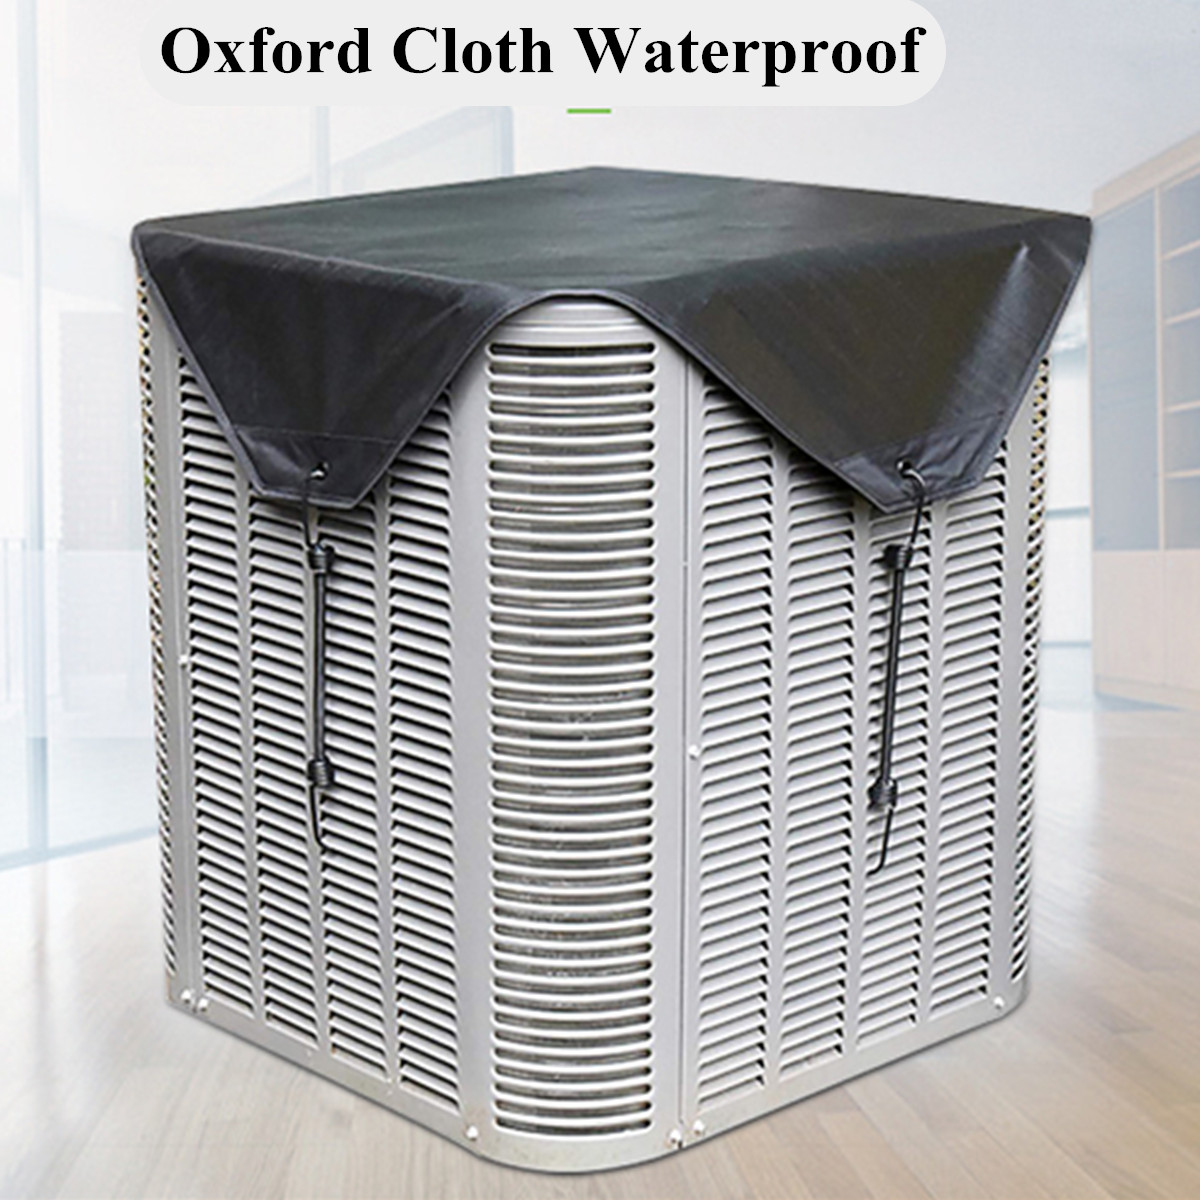 Air-Conditioner-Cover-Outdoor-Mesh-Waterproof-Oxford-Cloth-Protective-Cover-Dust-Net-Cooling-Fan-Cov-1560410-2